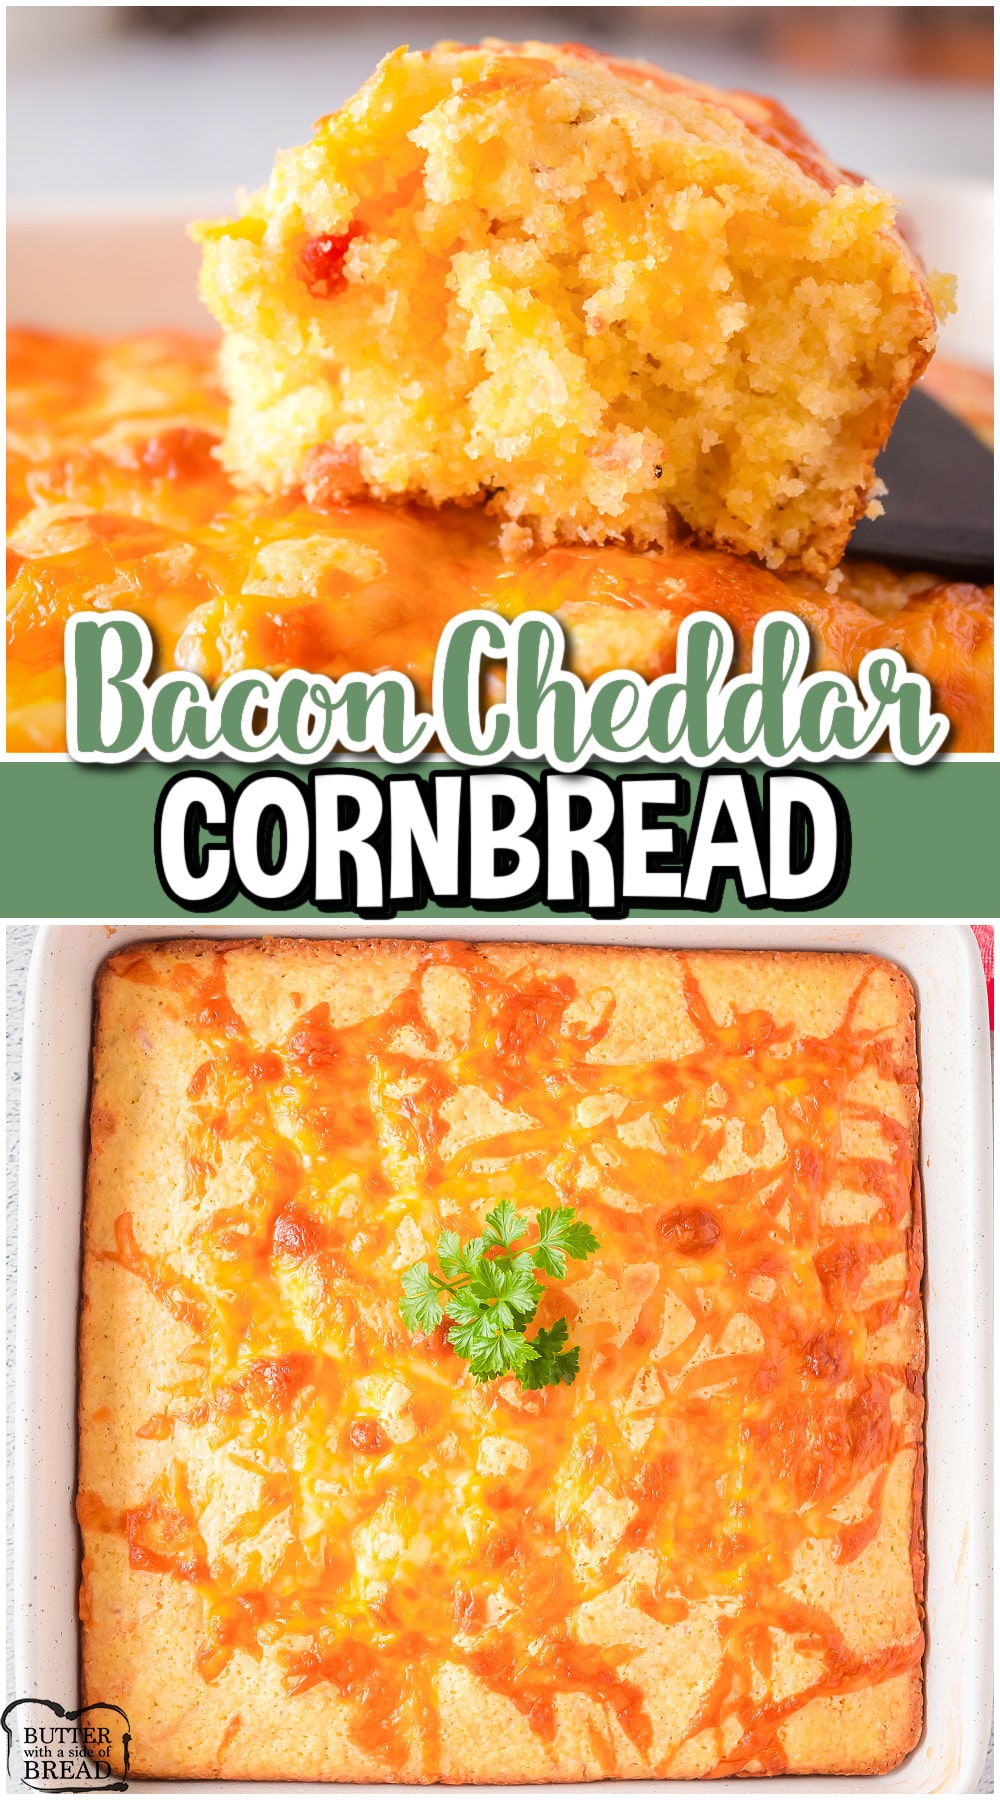 Bacon Cheddar Cornbread is an irresistible savory side dish that starts with a cornbread mix & adds bacon, butter, seasonings & cheddar cheese! Amazing bacon cornbread to serve alongside dinner. 